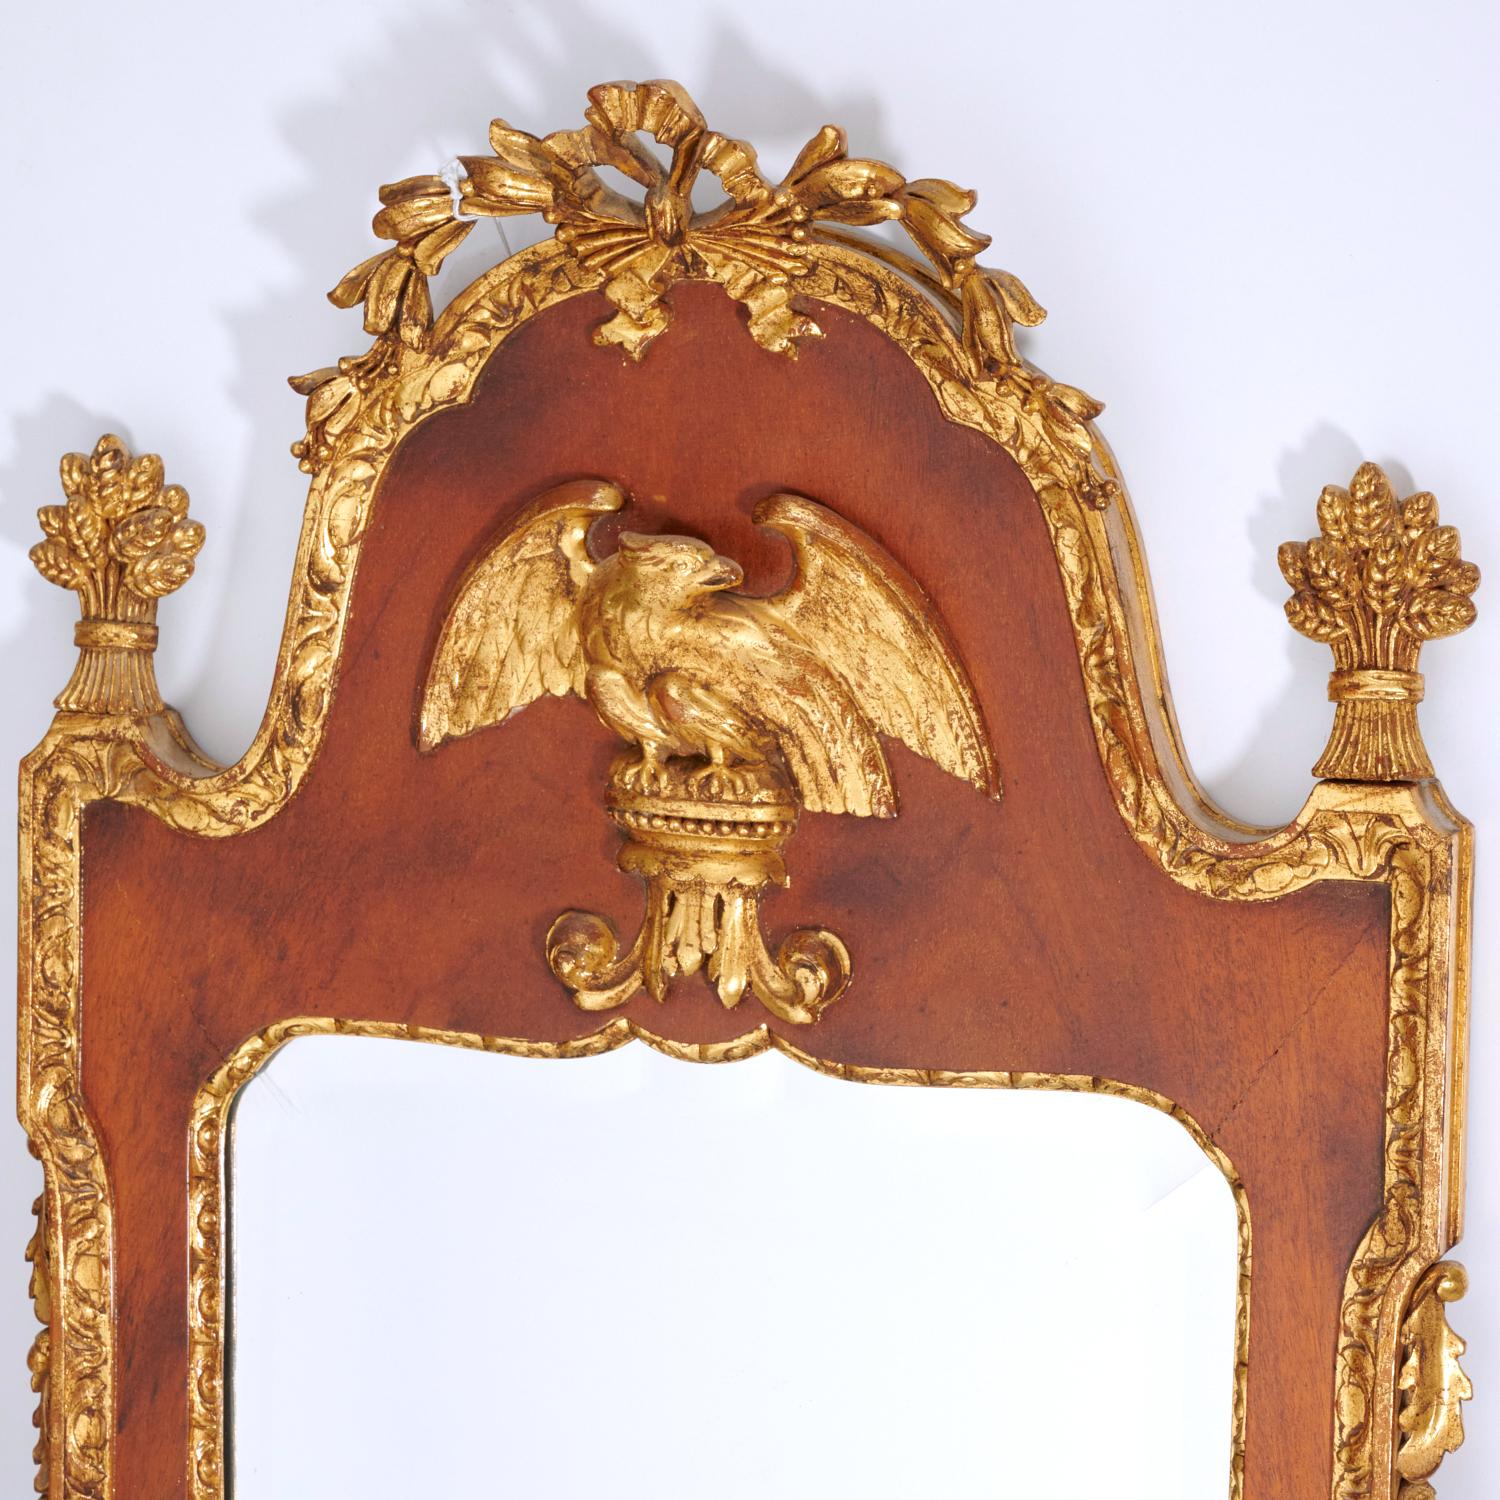 20th c., Decorative Federal-style mirror in mahogany with eagle in relief, ribbon and bellflower crest, wheat sheaf finials, acorn side detail, beveled glass, unmarked.

An elegant and timeless way to add visual interest to your home. With its